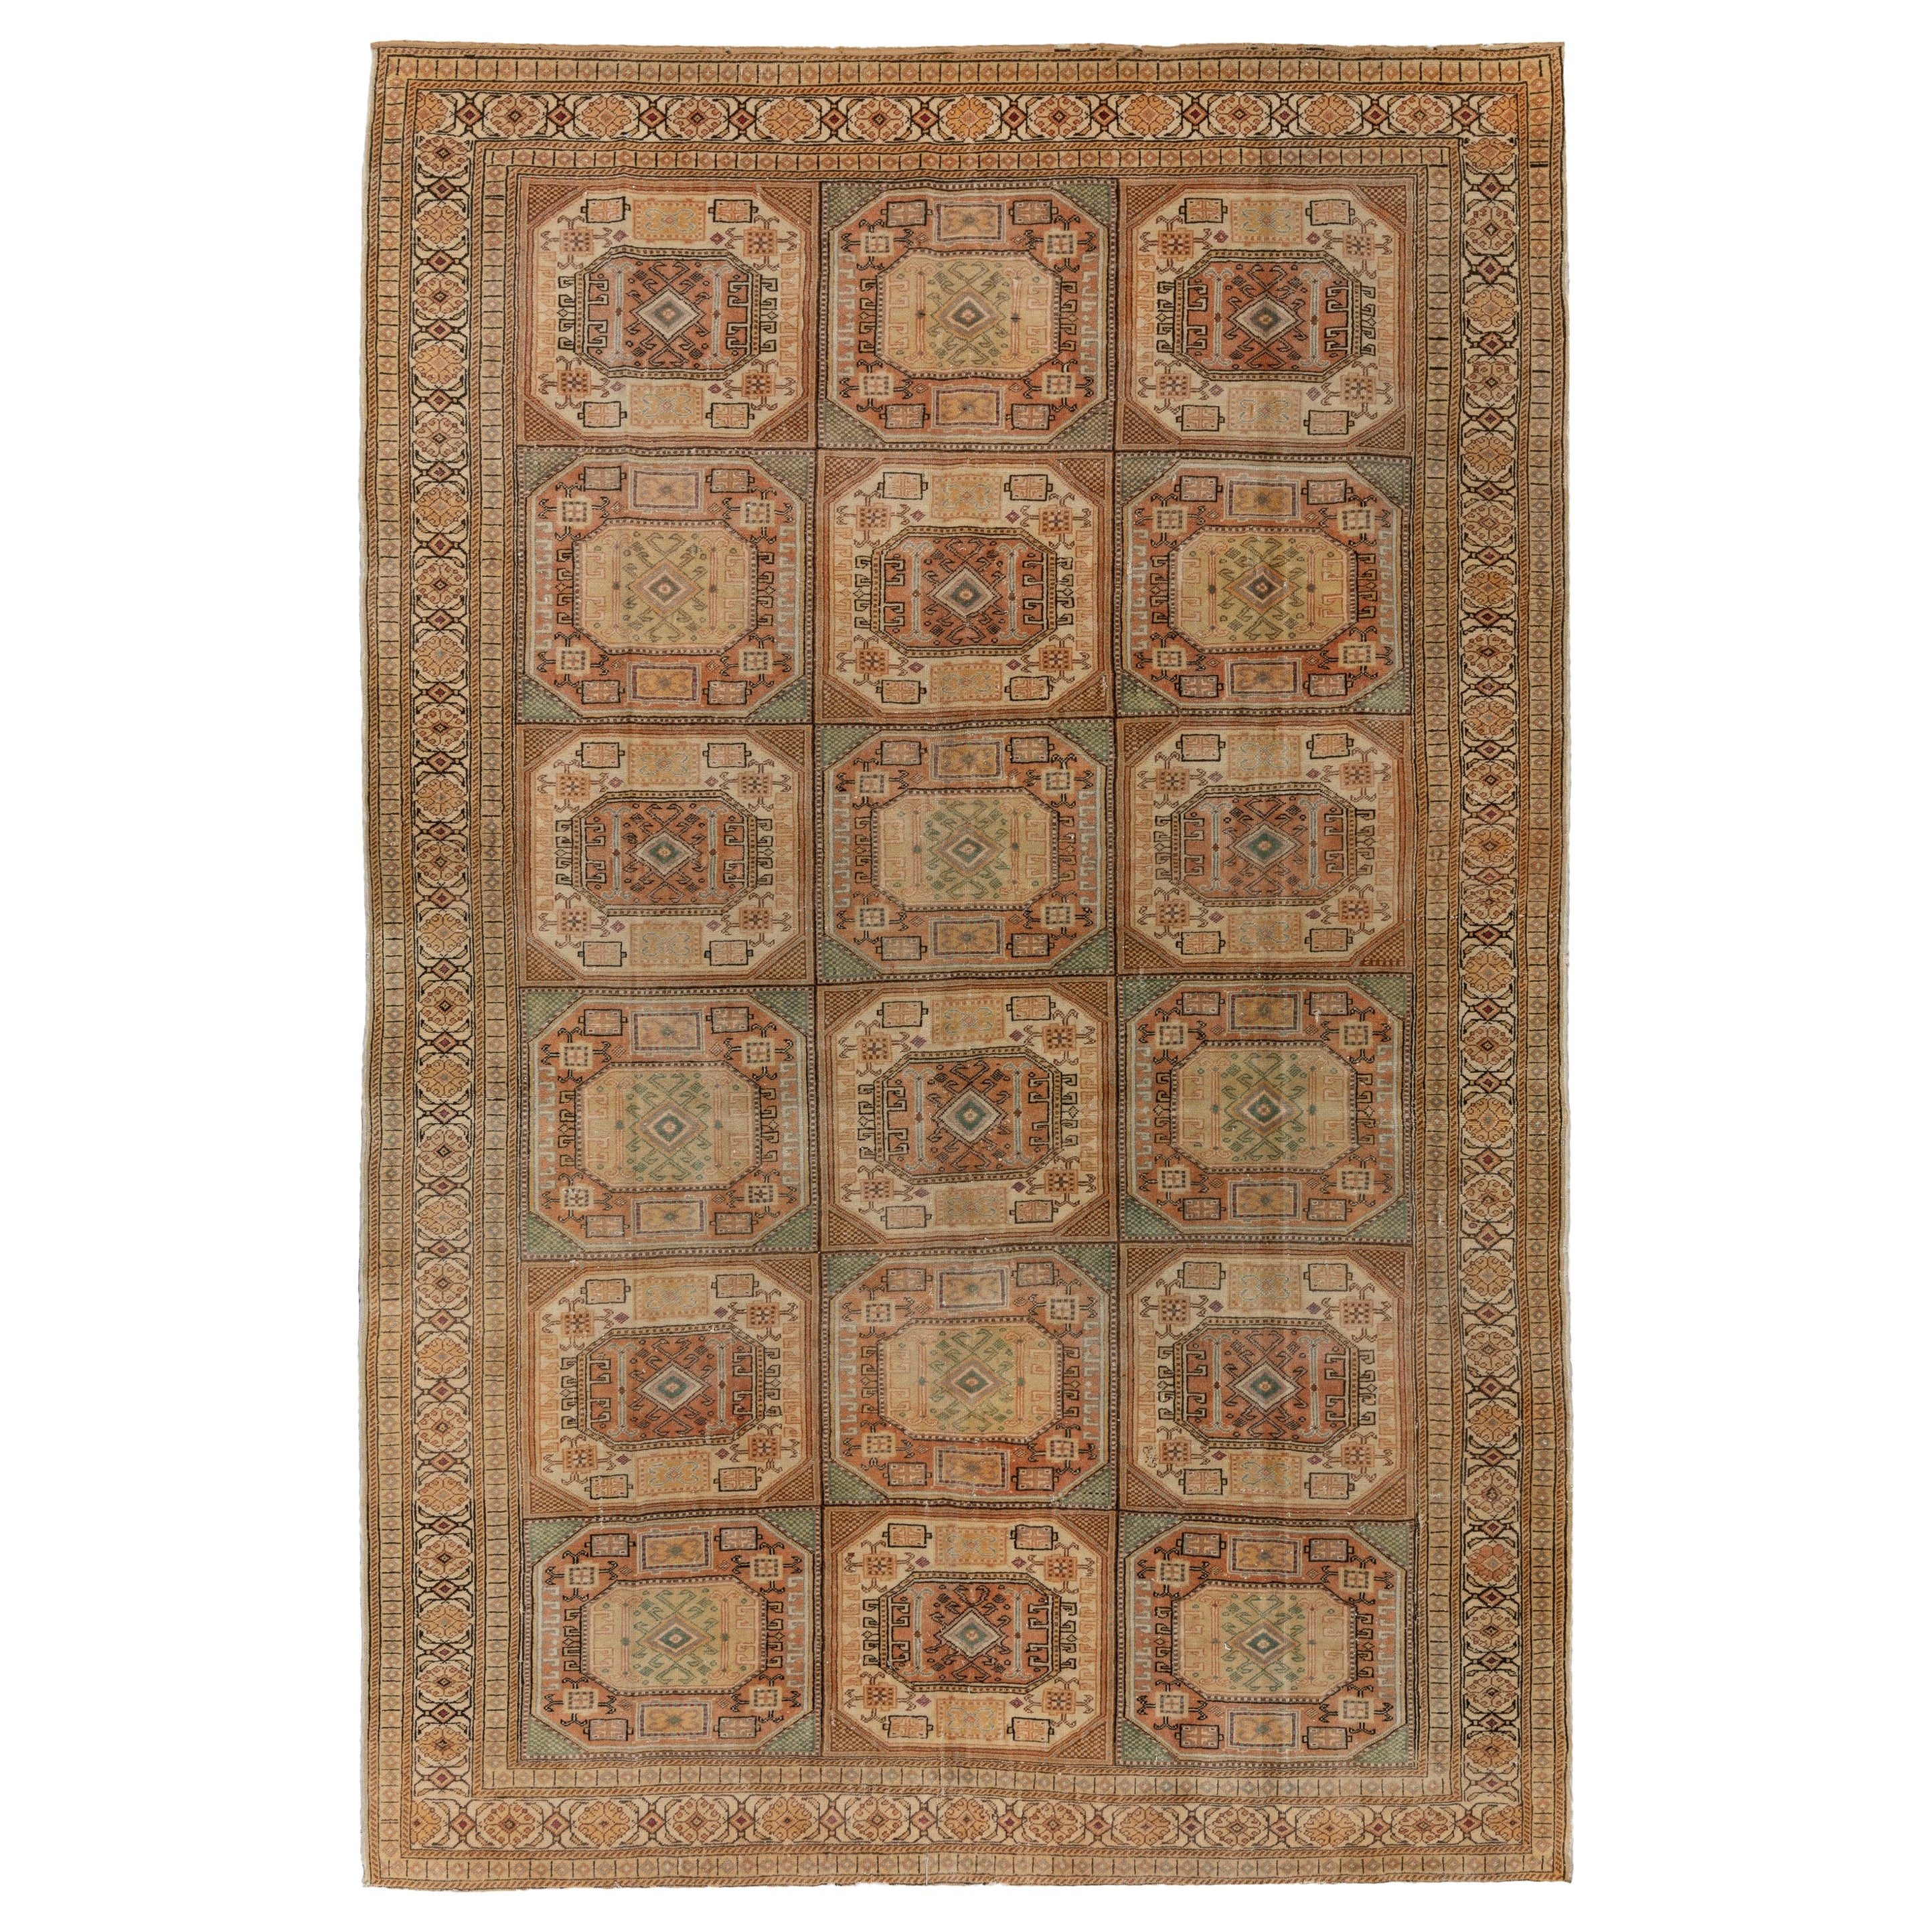 6.5x9.4 Ft Vintage Turkish Rug. Muted Colors, Geometric Design & Tribal Patterns For Sale